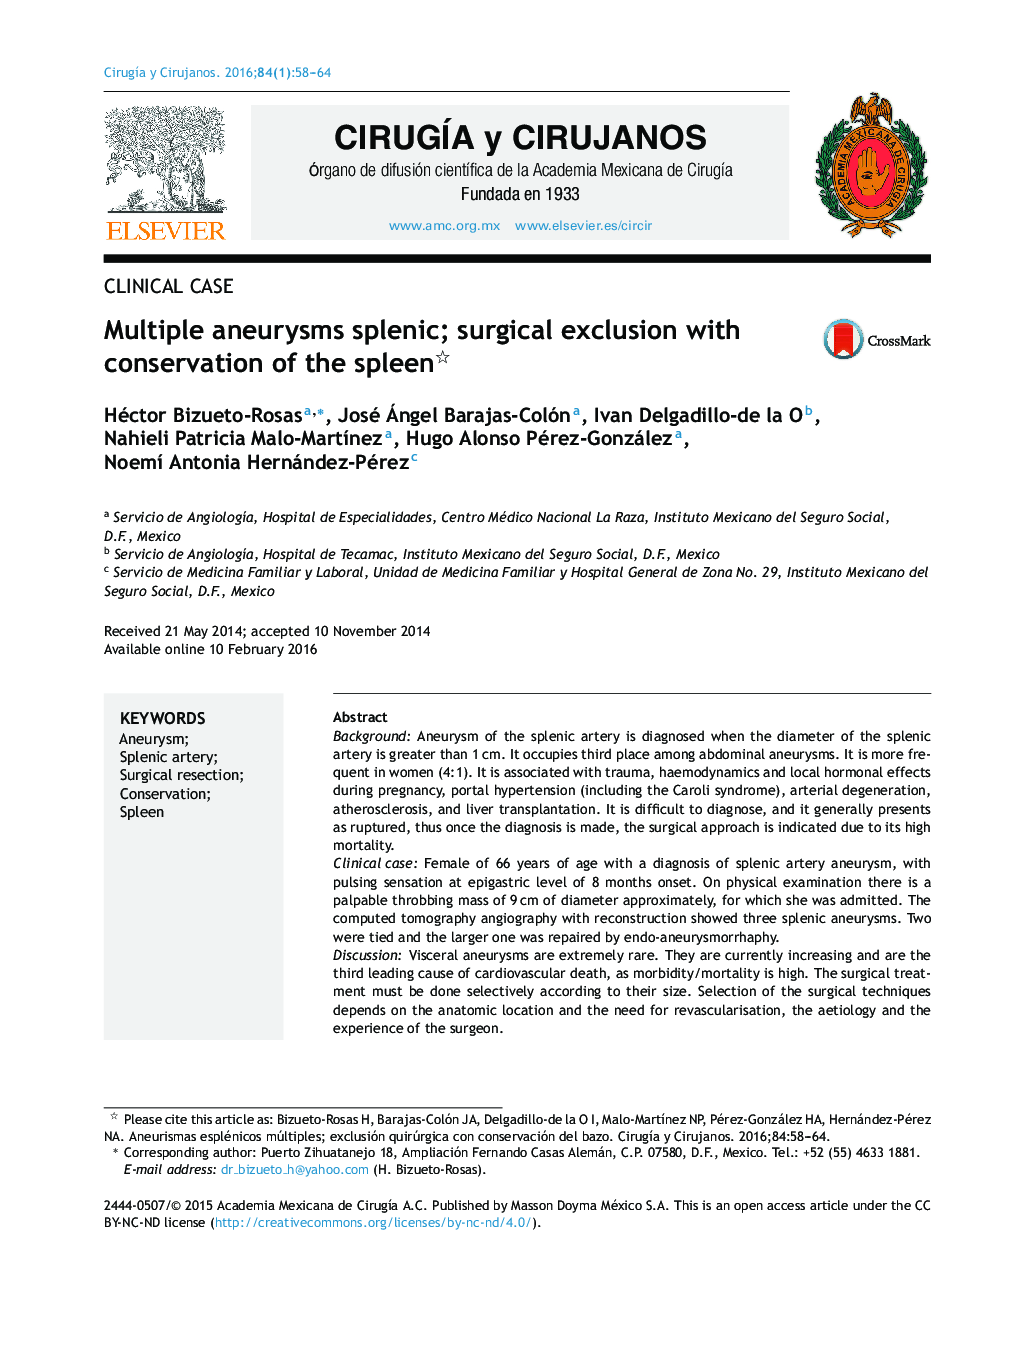 Multiple aneurysms splenic; surgical exclusion with conservation of the spleen 